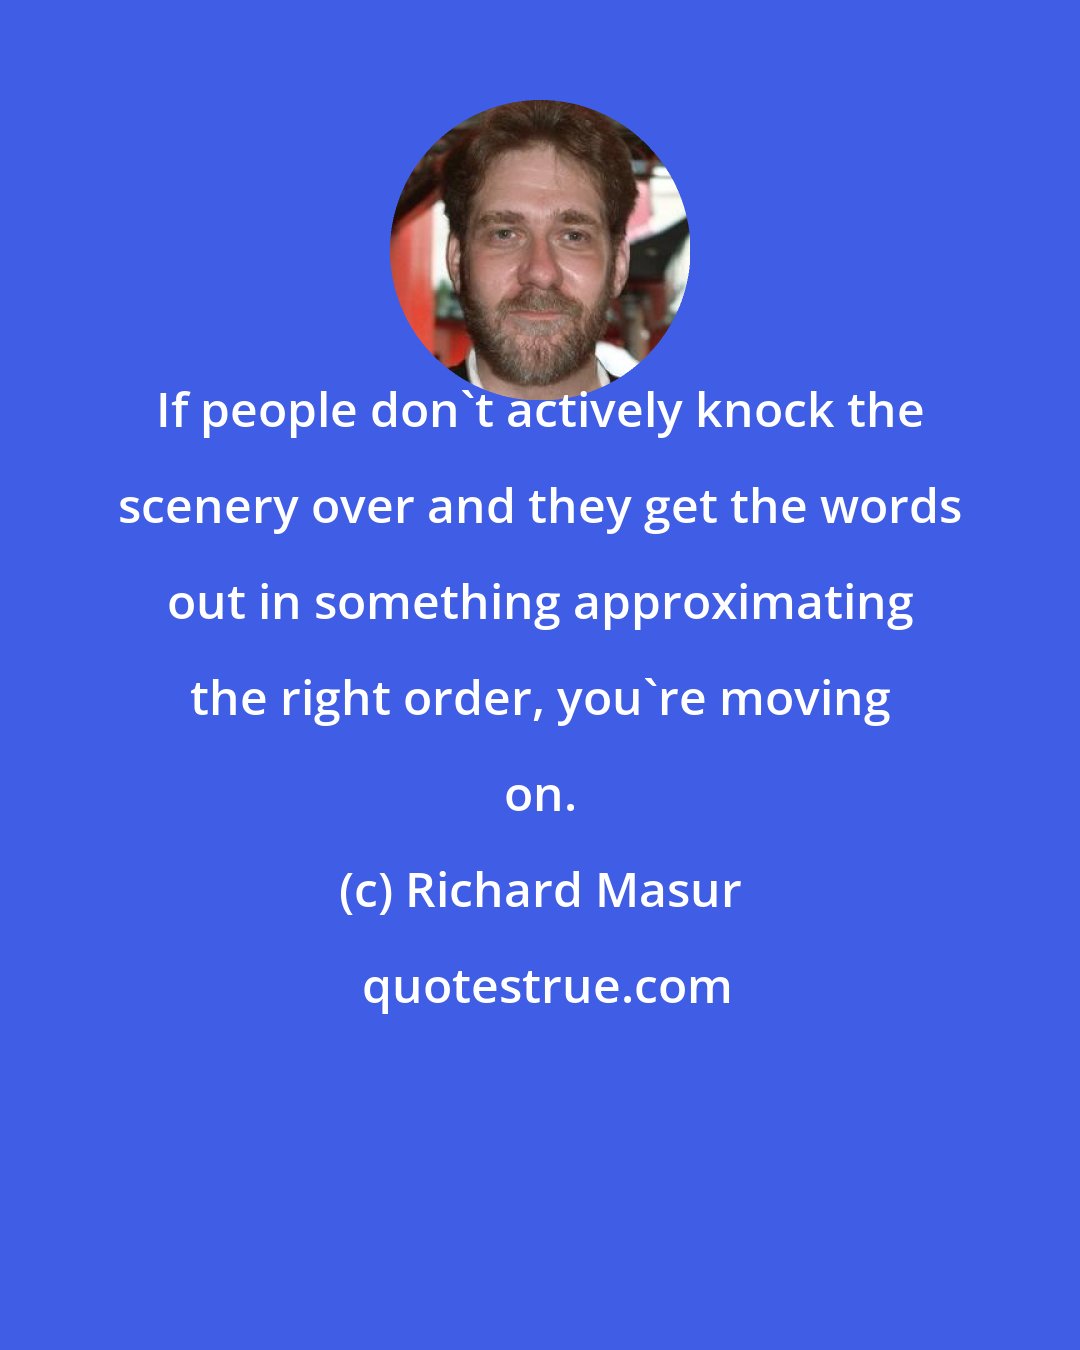 Richard Masur: If people don't actively knock the scenery over and they get the words out in something approximating the right order, you're moving on.